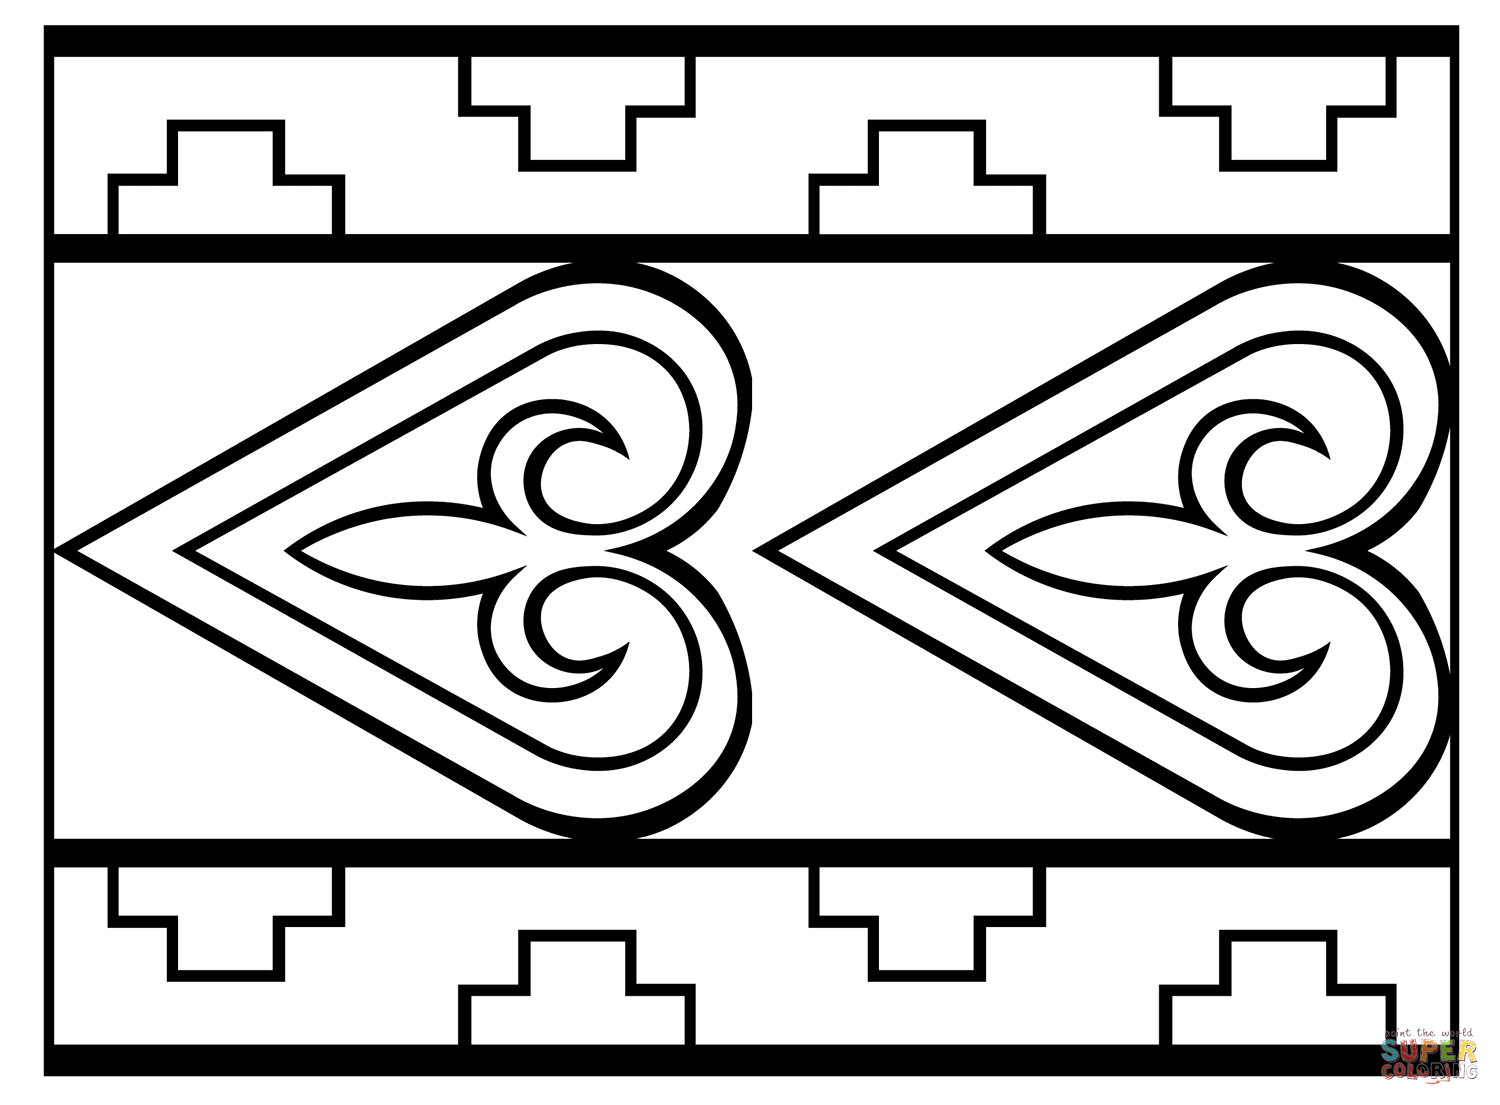 12Th Century Pattern Design coloring page | Free Printable Coloring Pages